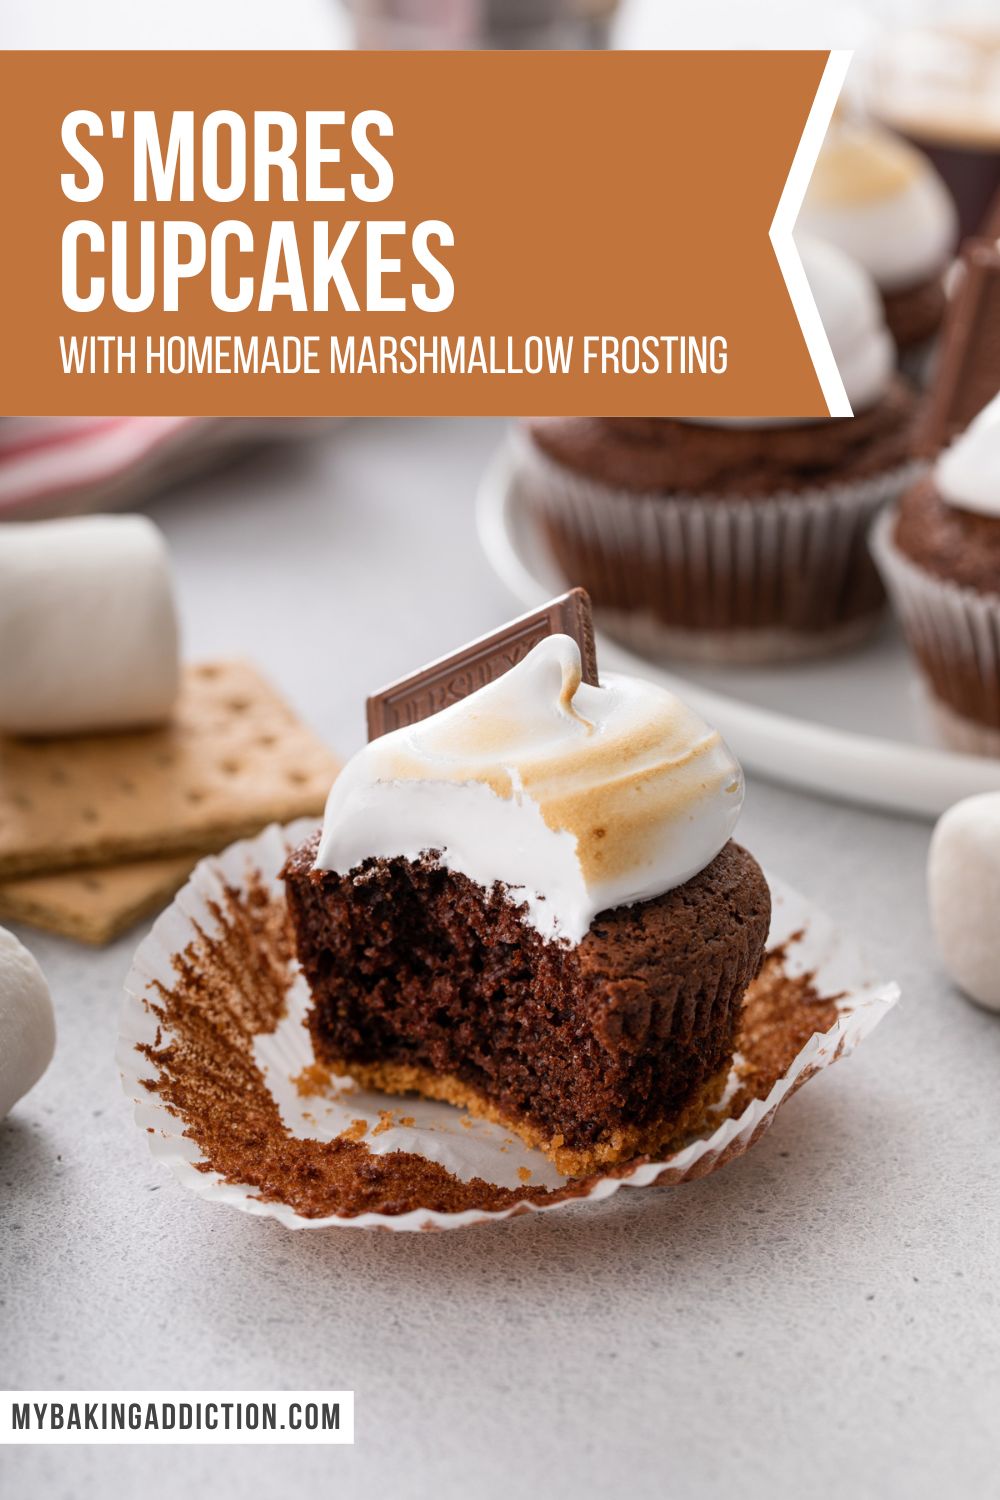 Unwrapped s'mores cupcake with a bite taken out of it. A platter of more cupcakes is visible in the background. Text overlay includes recipe name.